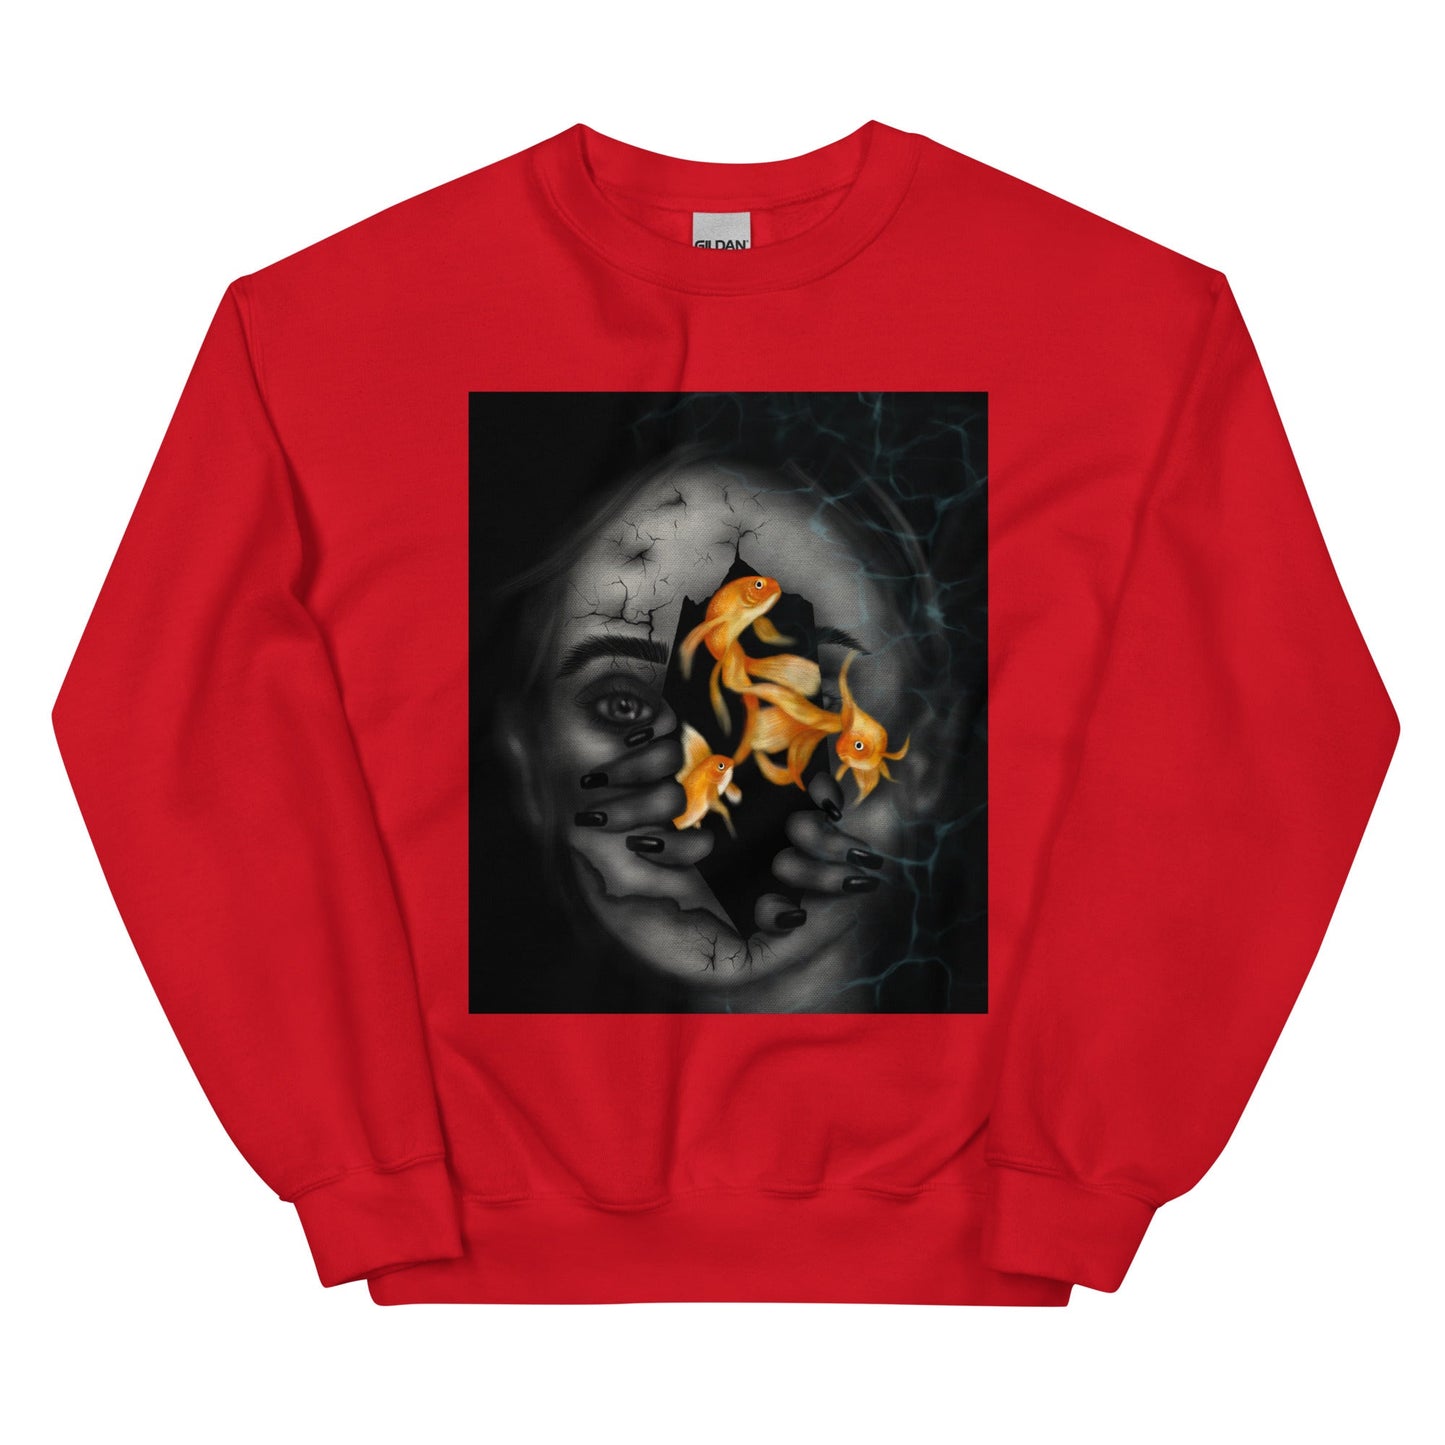 unisex-classic-sweatshirt-in-search-of-freedom-red